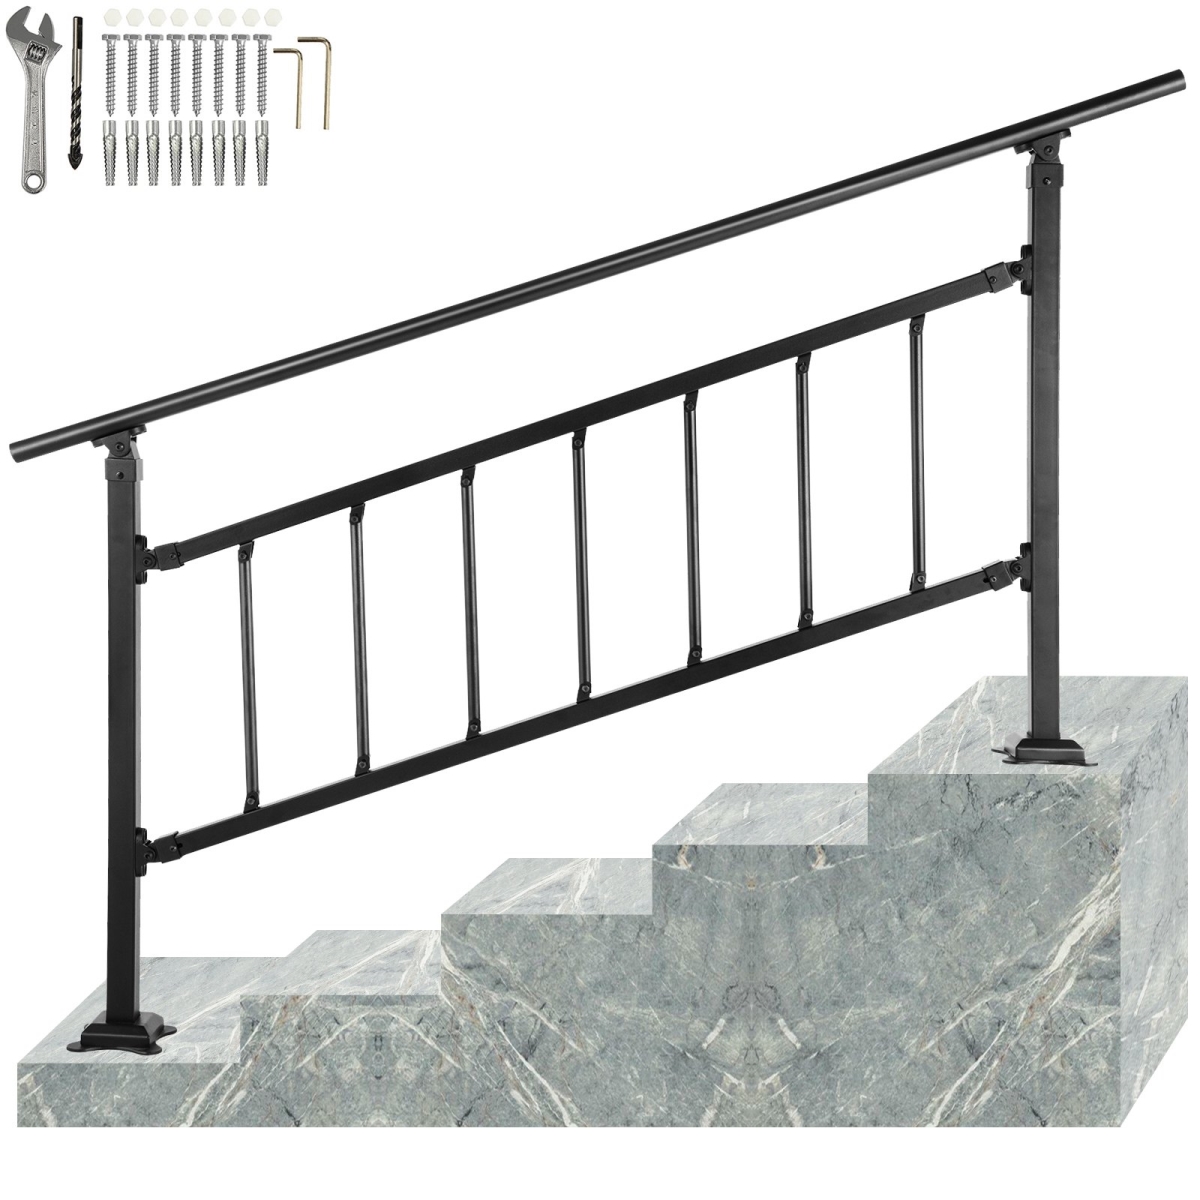 Picture of Vevor TZFGZXSLZFSD4JWFNV0 Outdoor Stair Railing for 1-5 Steps Transitional Wrought Iron Handrail - Matte Black